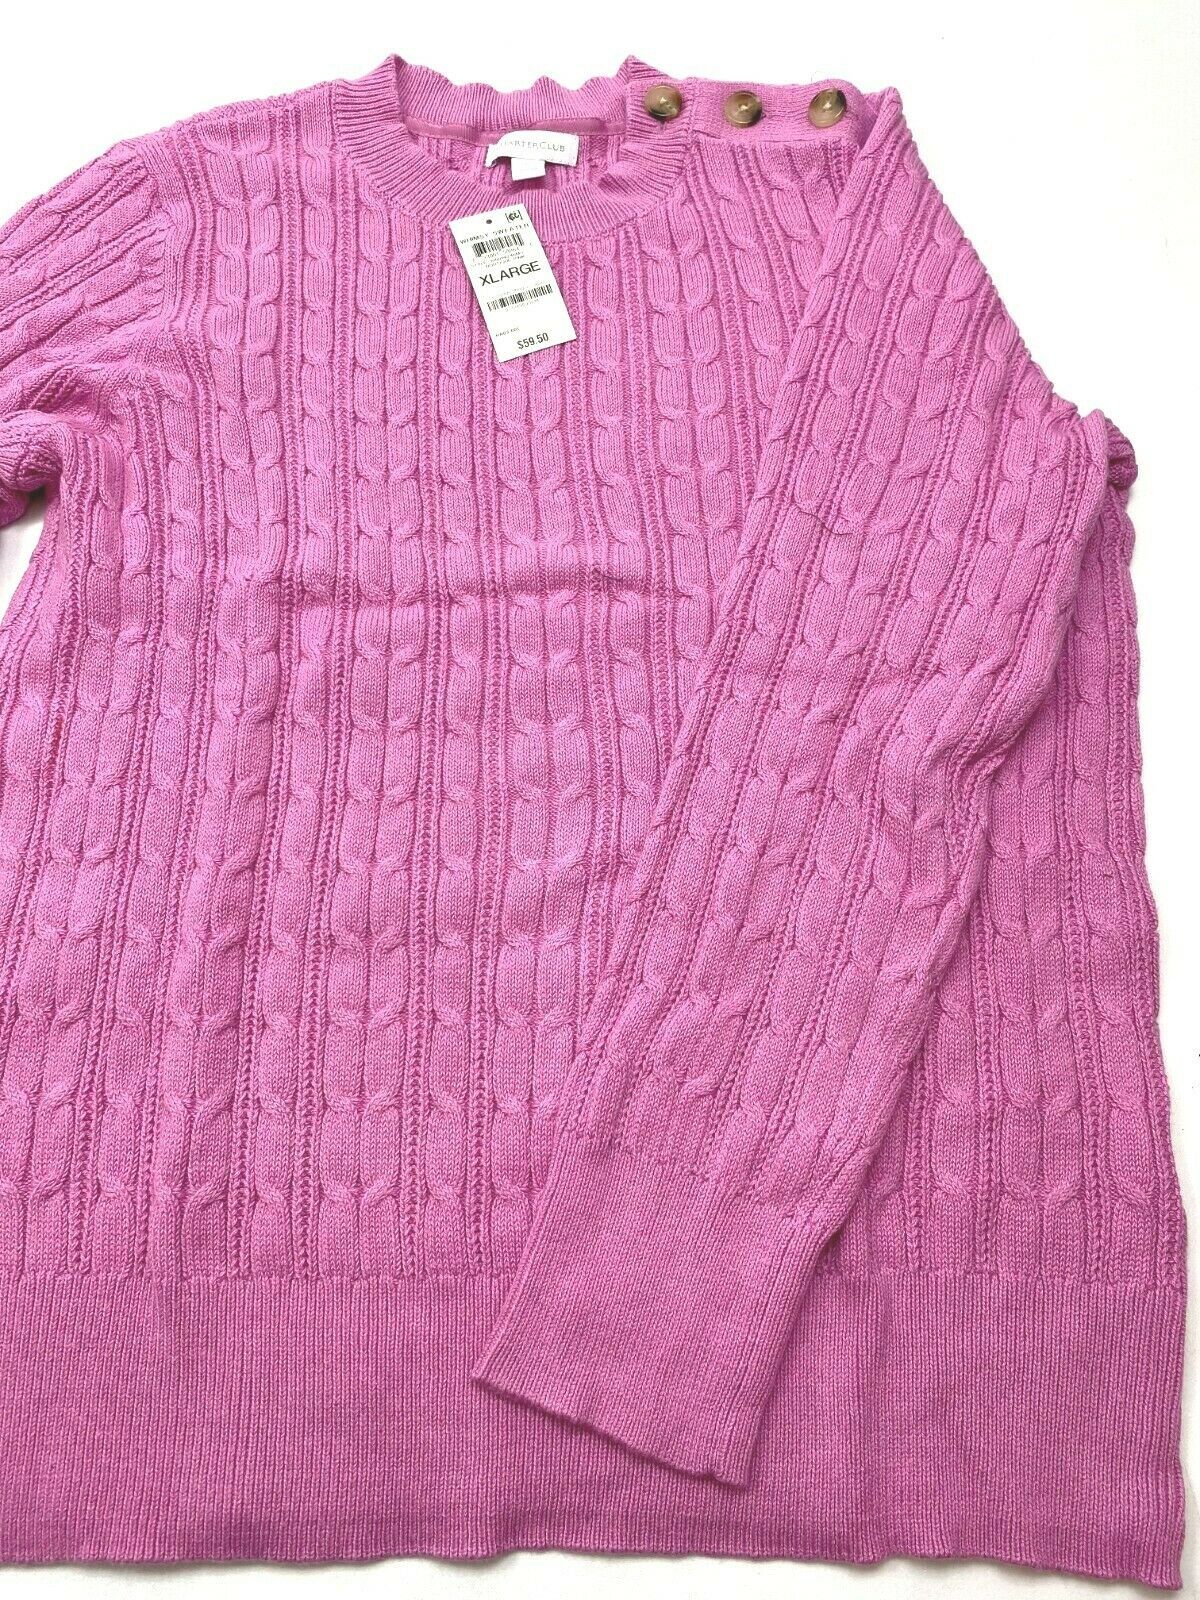 Charter Club Button-Shoulder Sweater Color: Light Pink